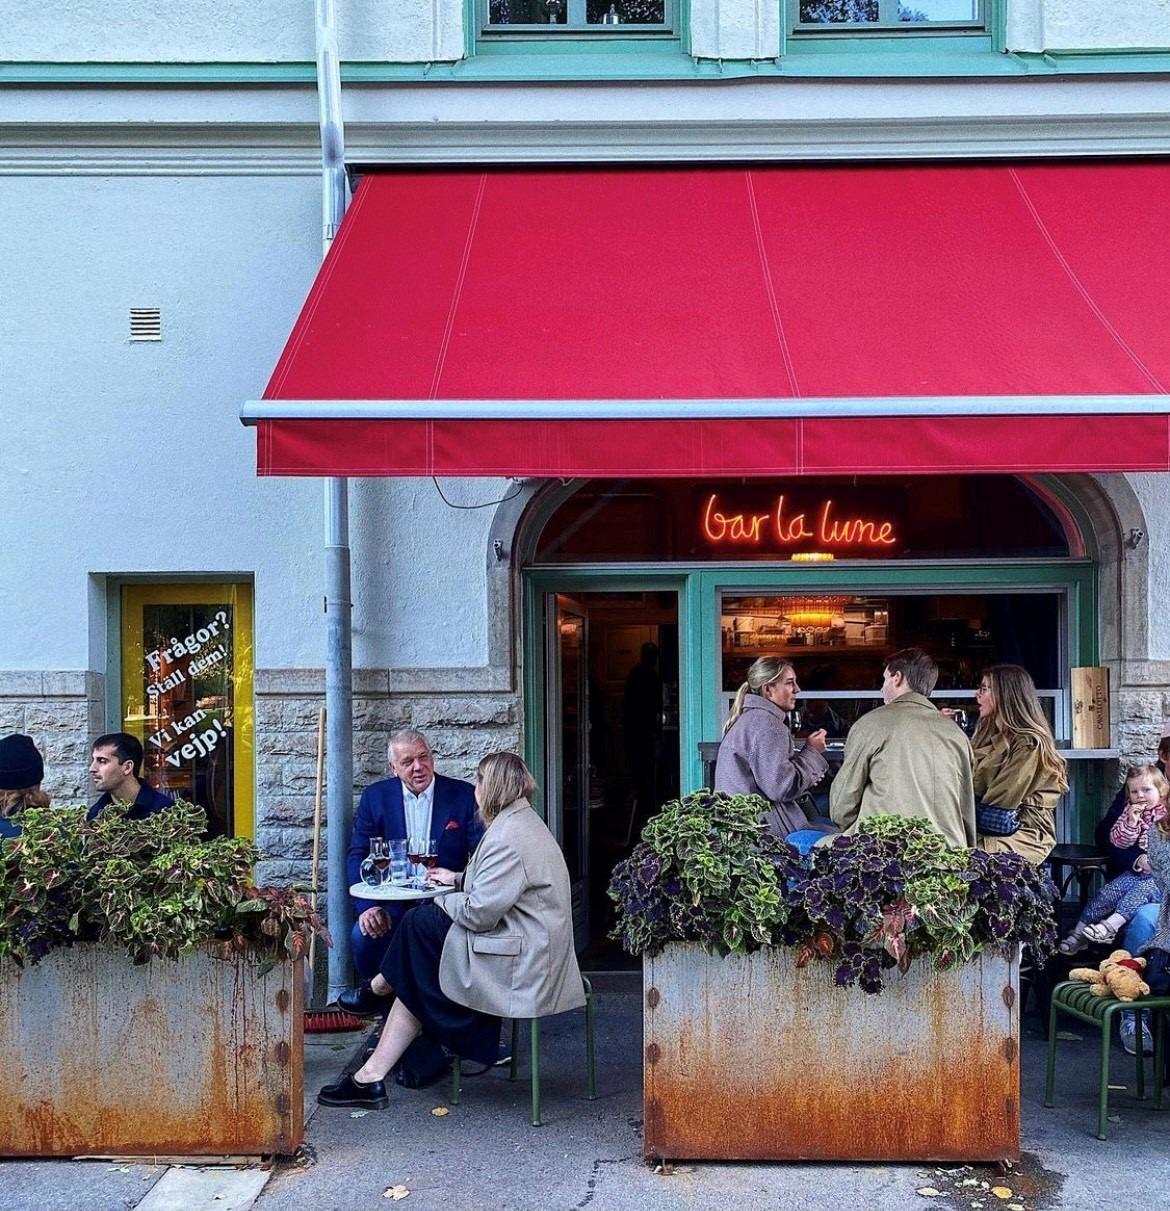 People sitting outside a restaurant enjoying food and drinks.